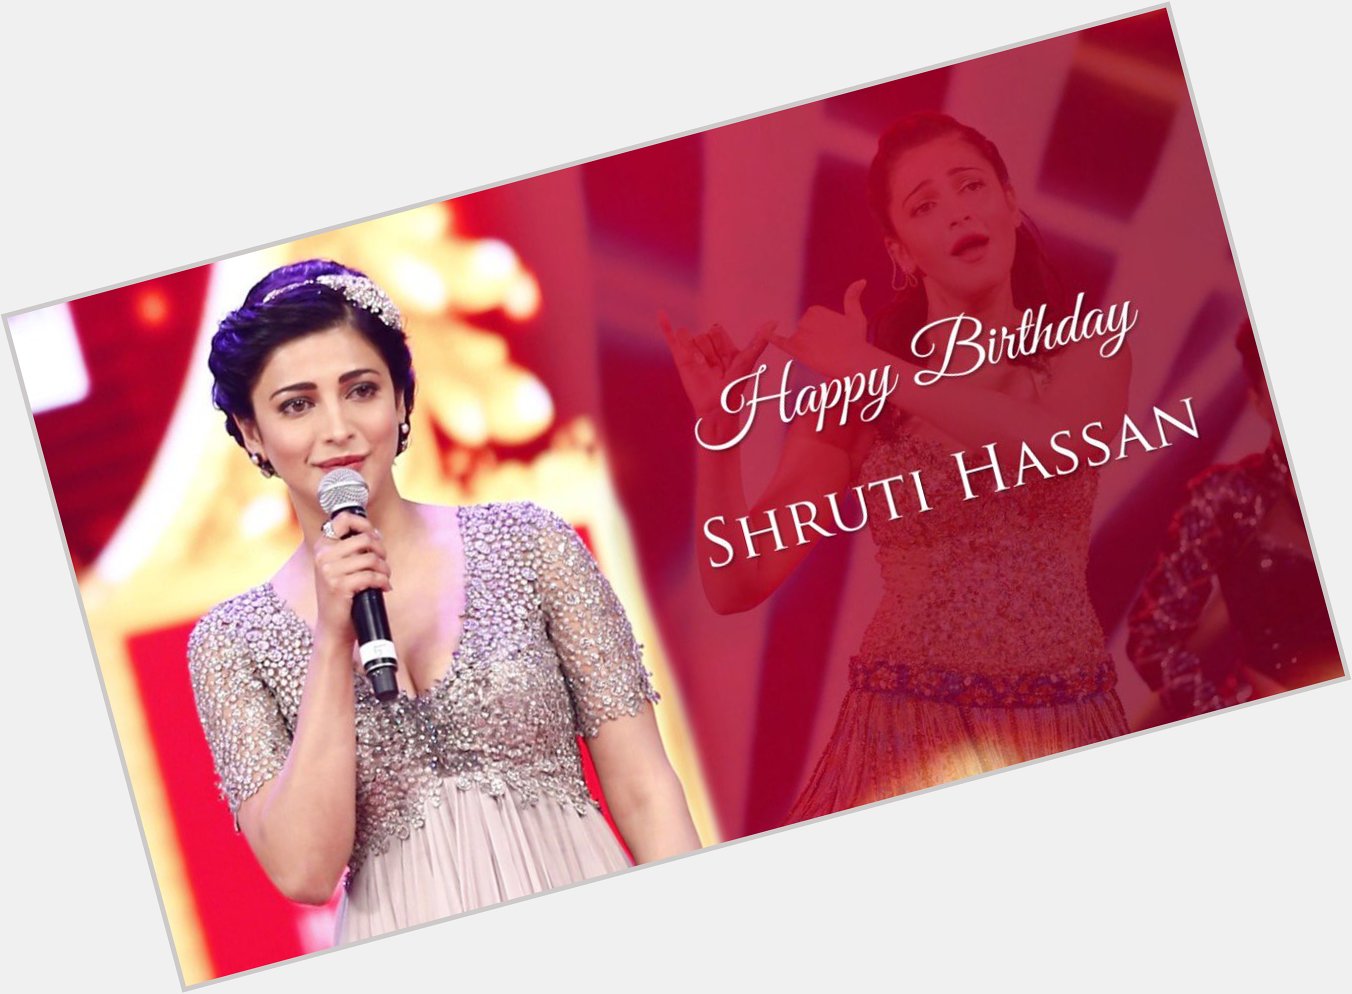 To the Most Energetic and Beautiful Shruti Haasan, a Very happy birthday.  